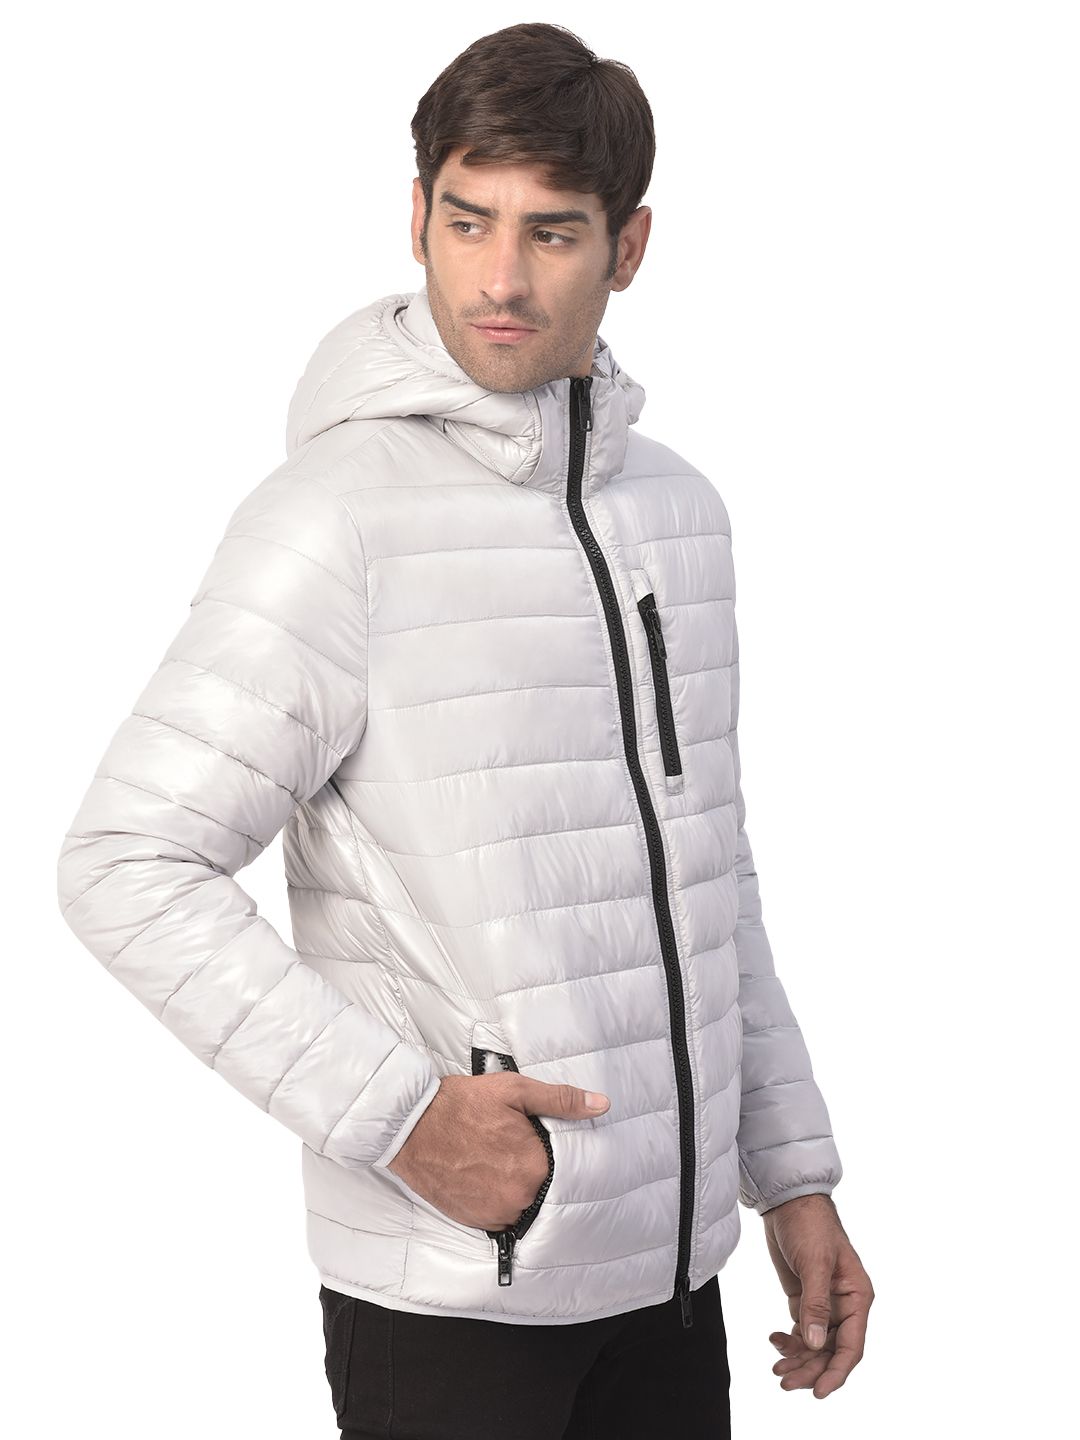 Silver grey quilted jacket for men